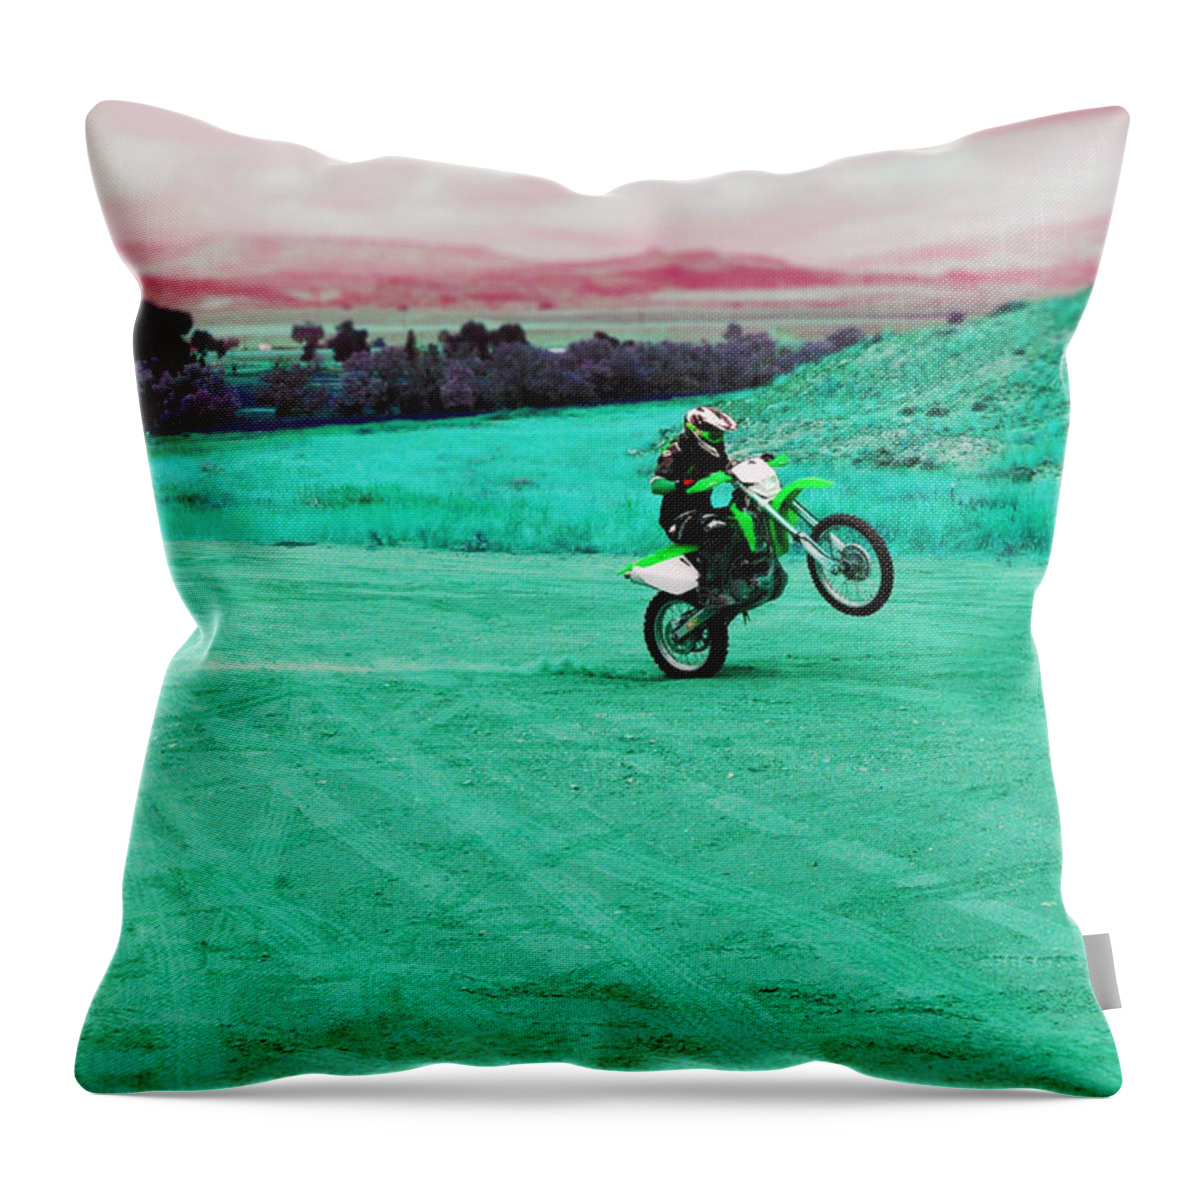 Motorcycle Throw Pillow featuring the photograph Crazy Rider by Lisa Holland-Gillem